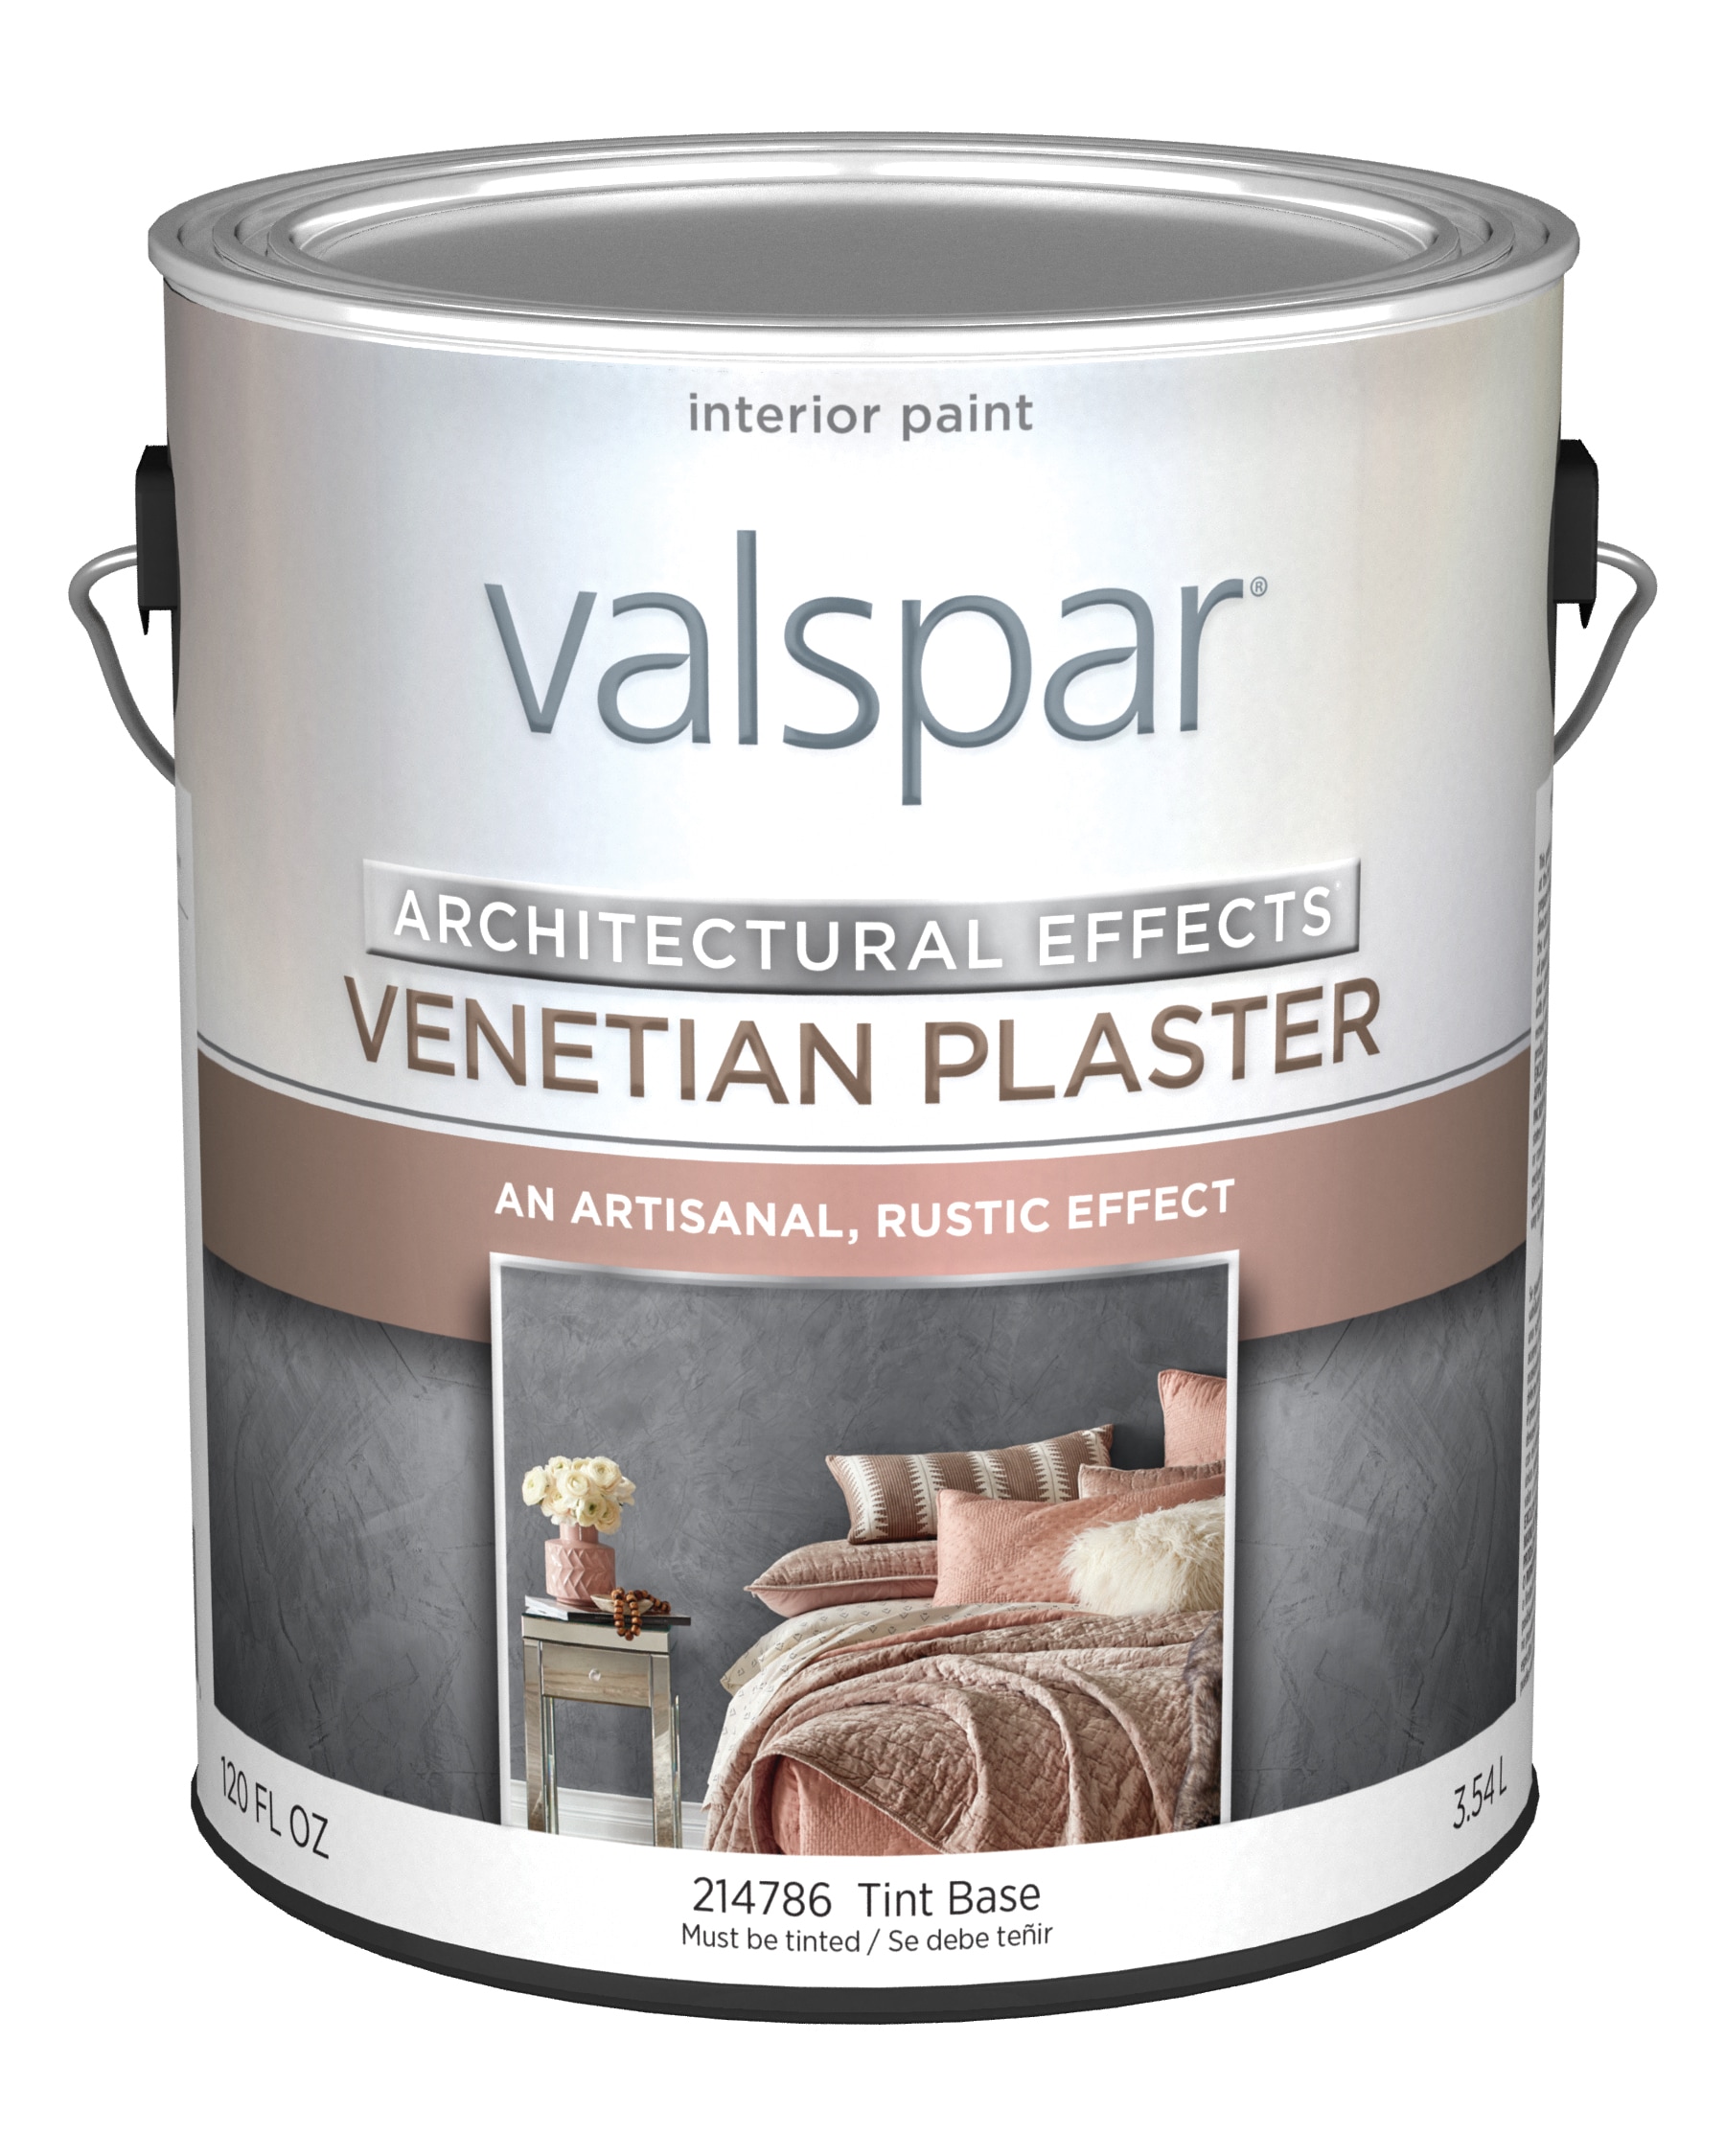 How to Create a Concrete Look with Venetian Plaster - Plank and Pillow